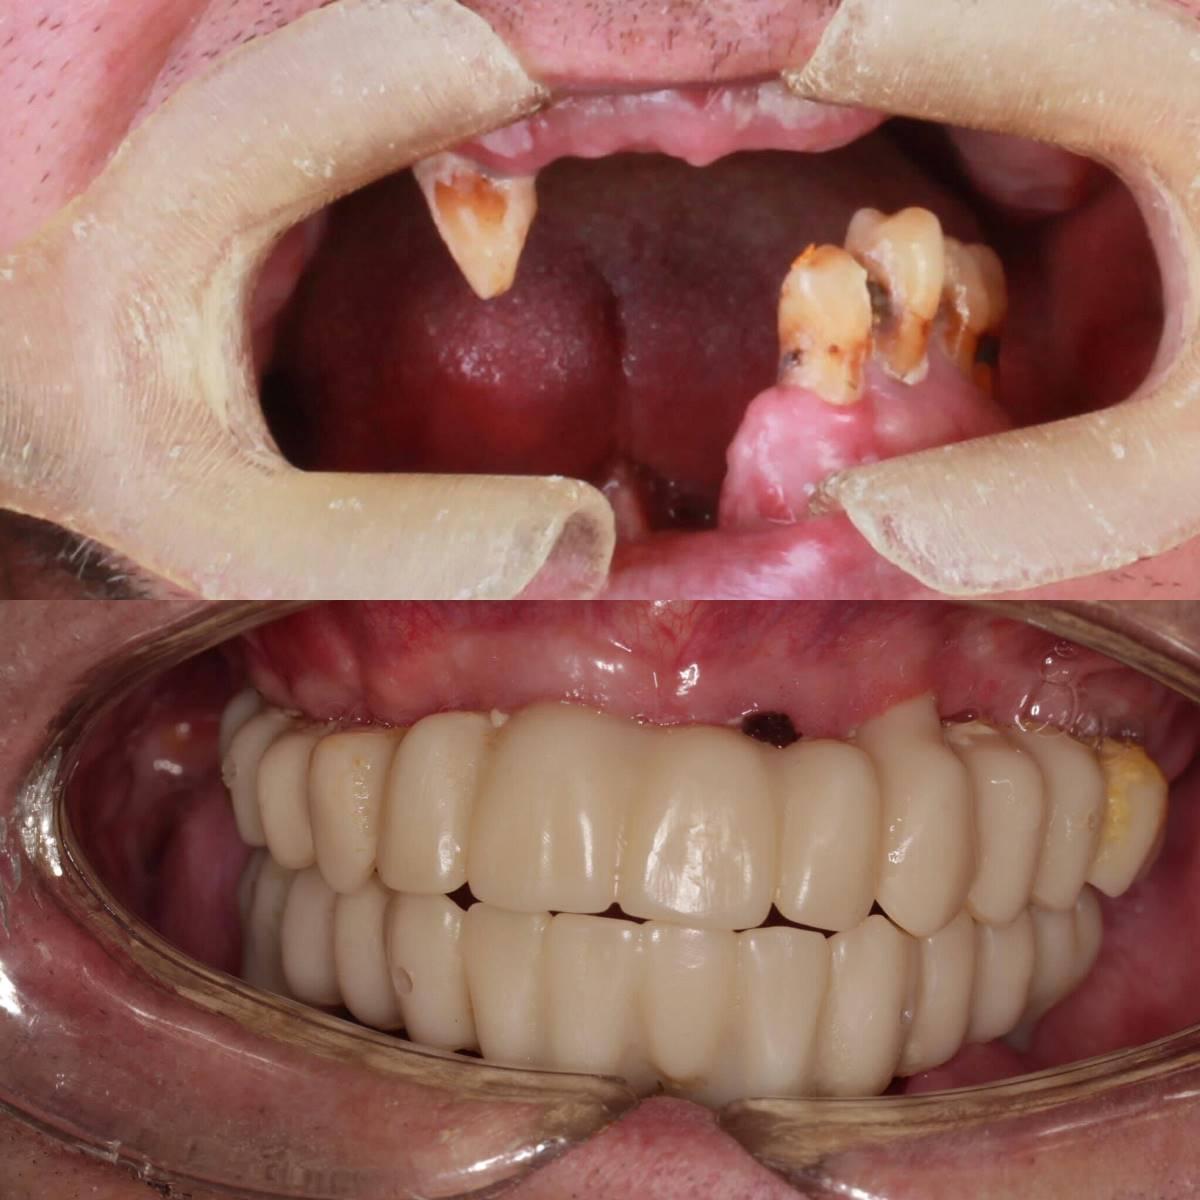 Reconstruction of the lower jaw using a fibular autograft with dental implantation and immediate crown loading